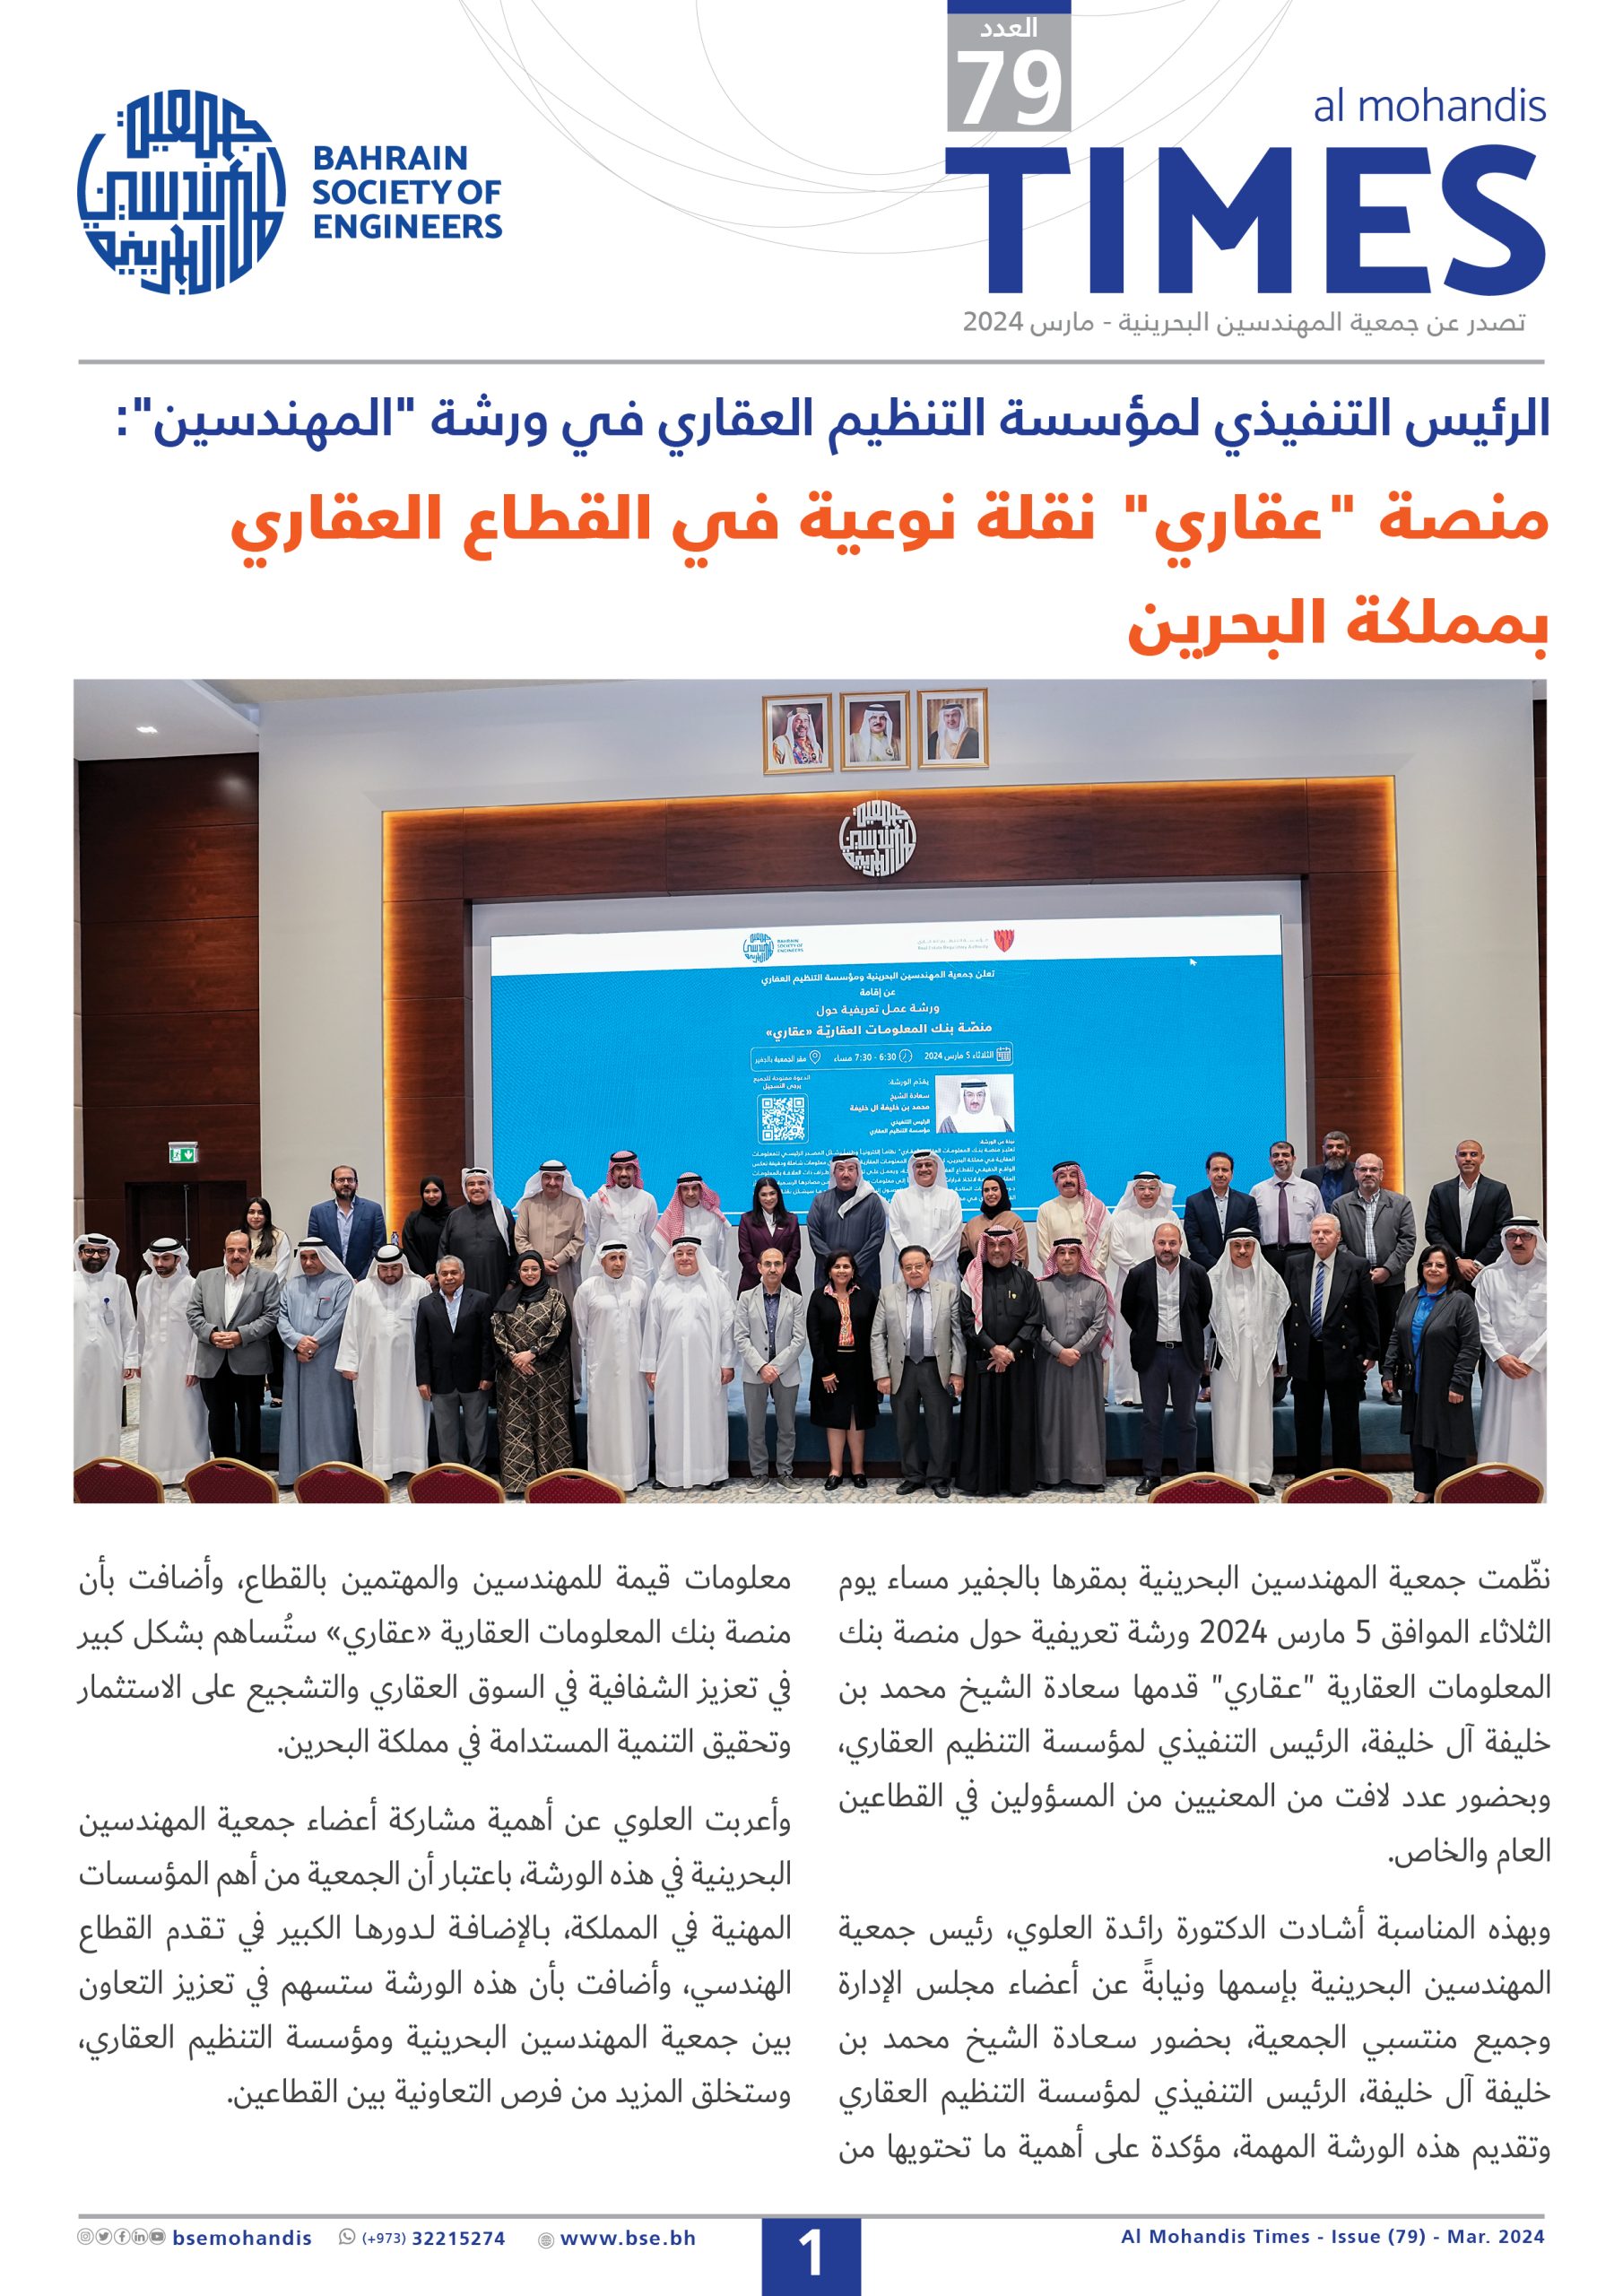 Al Mohandis Times Issue 79